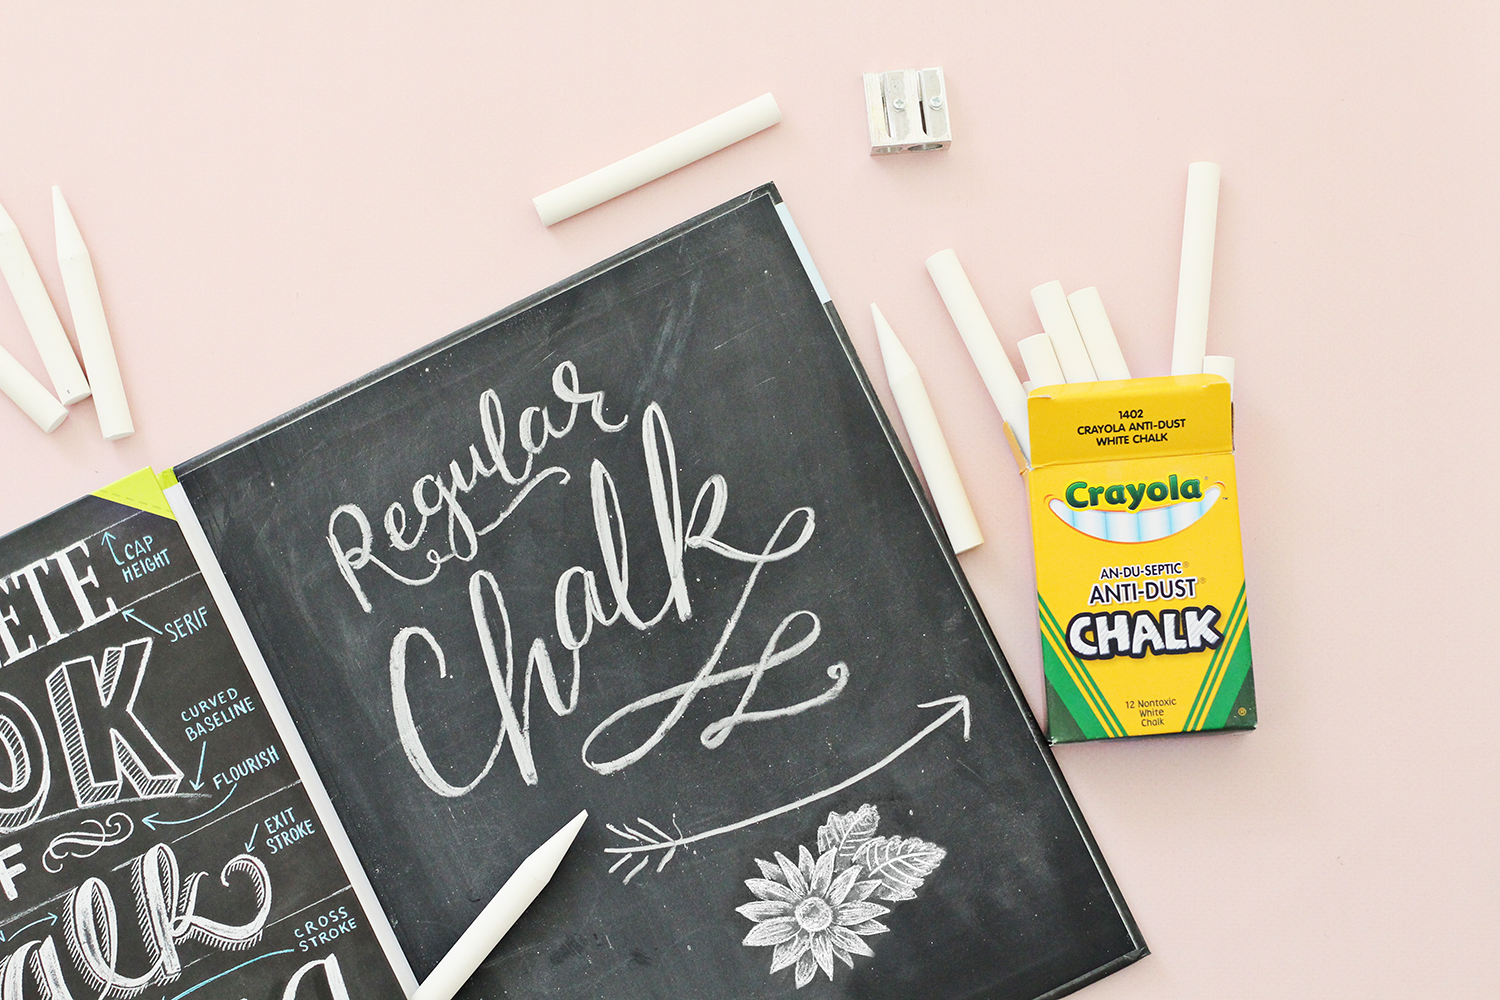 Crayola Anti-Dust Chalk is the recommended chalk in The Complete Book of Chalk Lettering by Valerie McKeehan